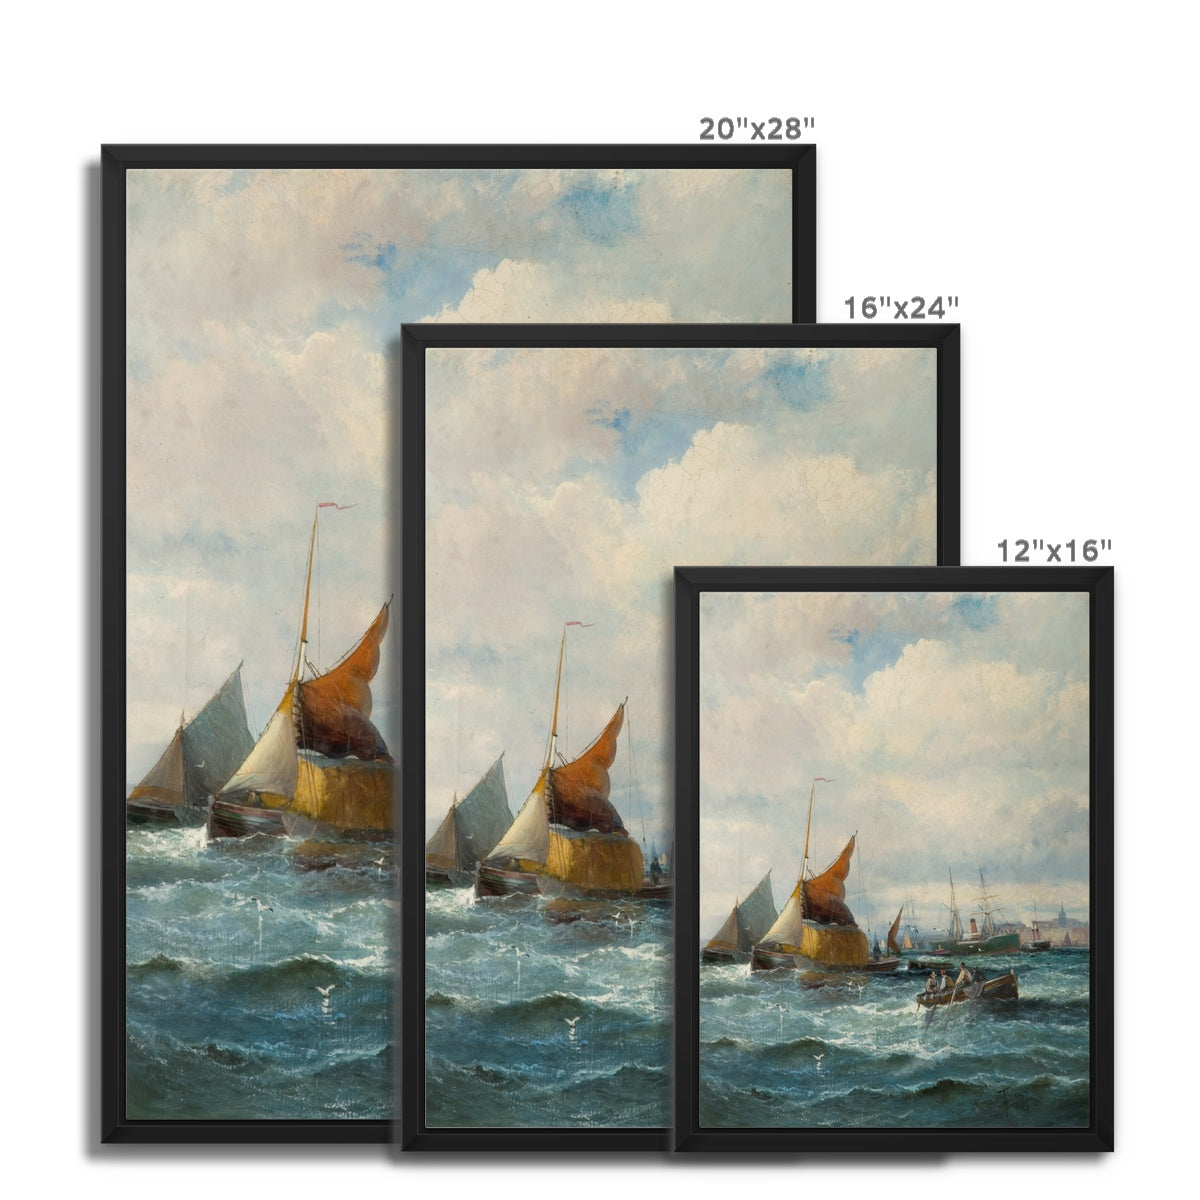 Framed Canvas - Shipping off a Headland by Georges Thornley